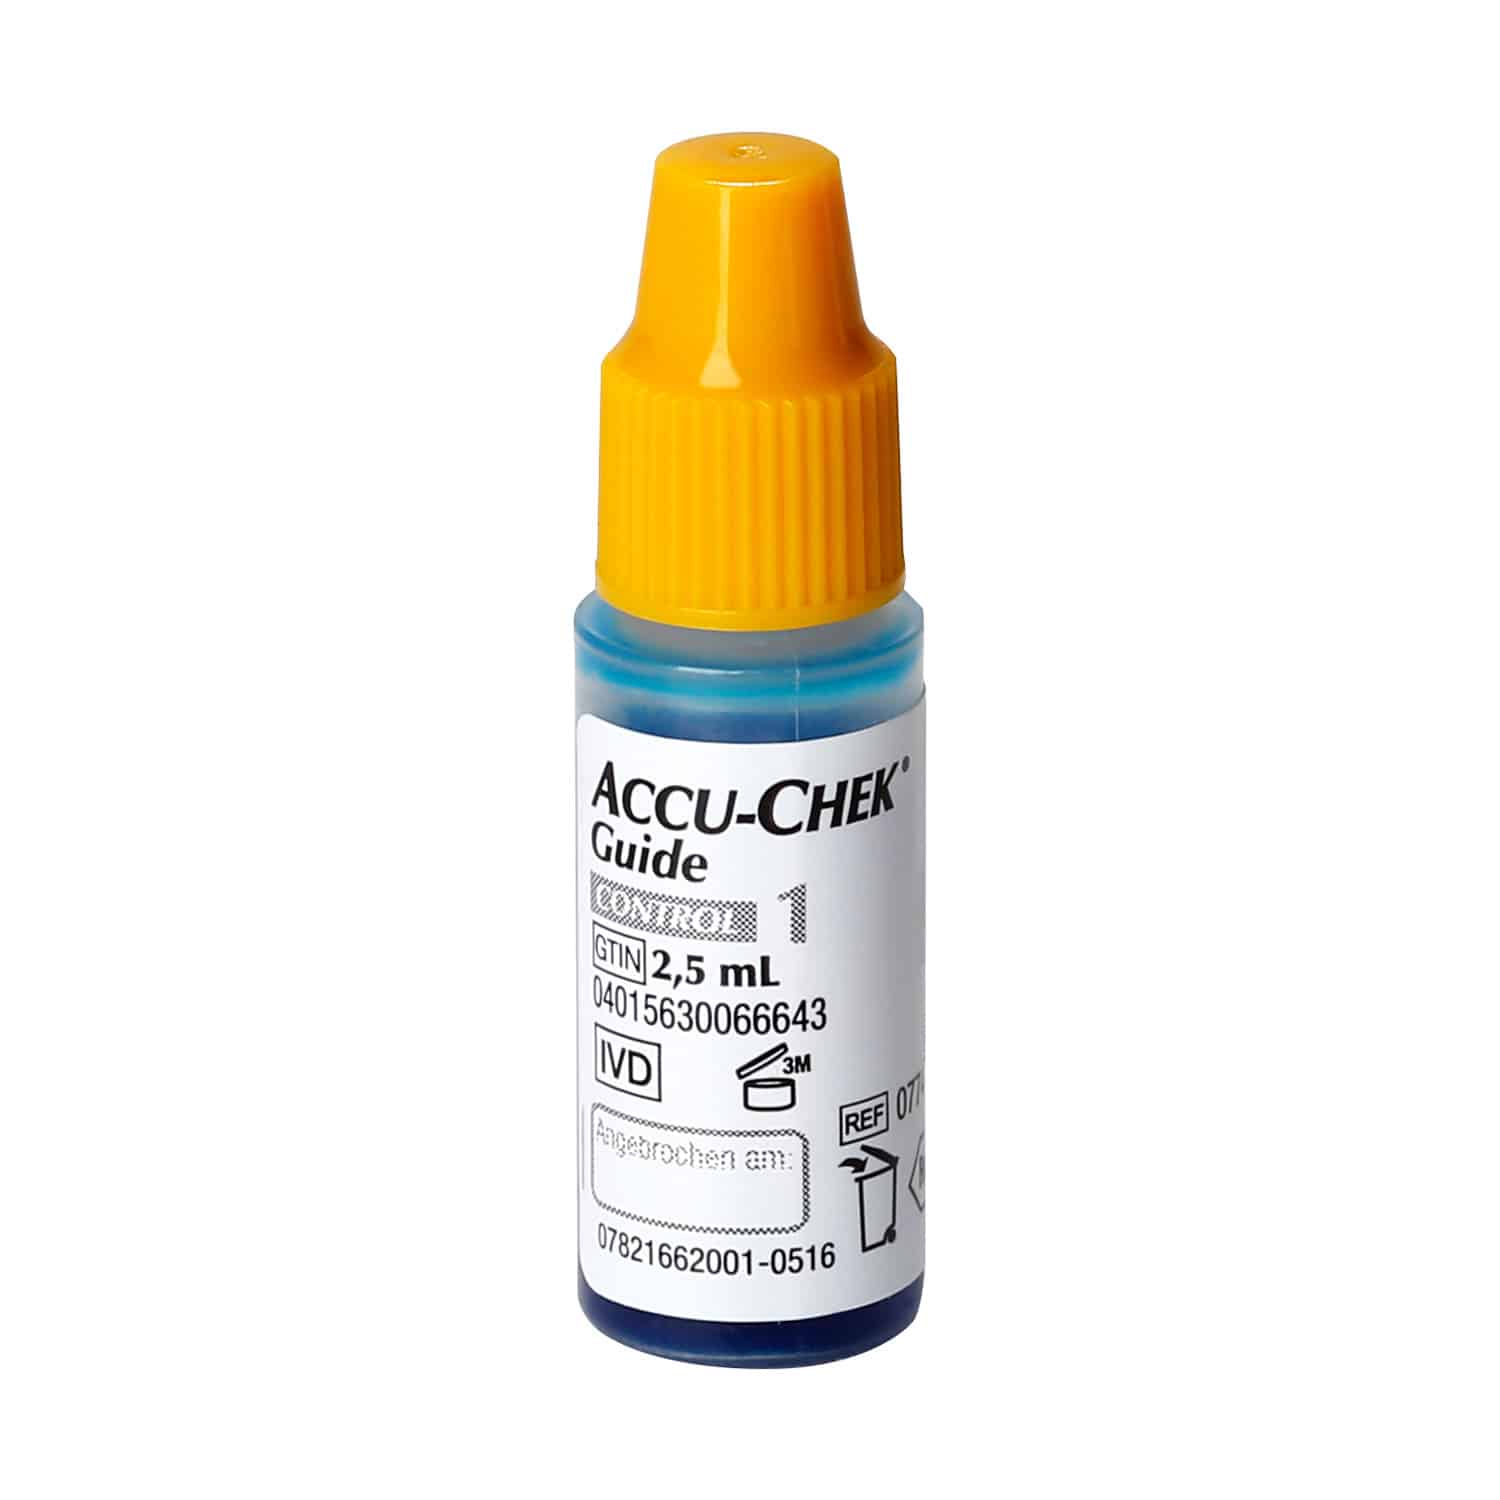 Accu-Chek Guide Control Solution For Checking The Function Of The Meter And Test Strips